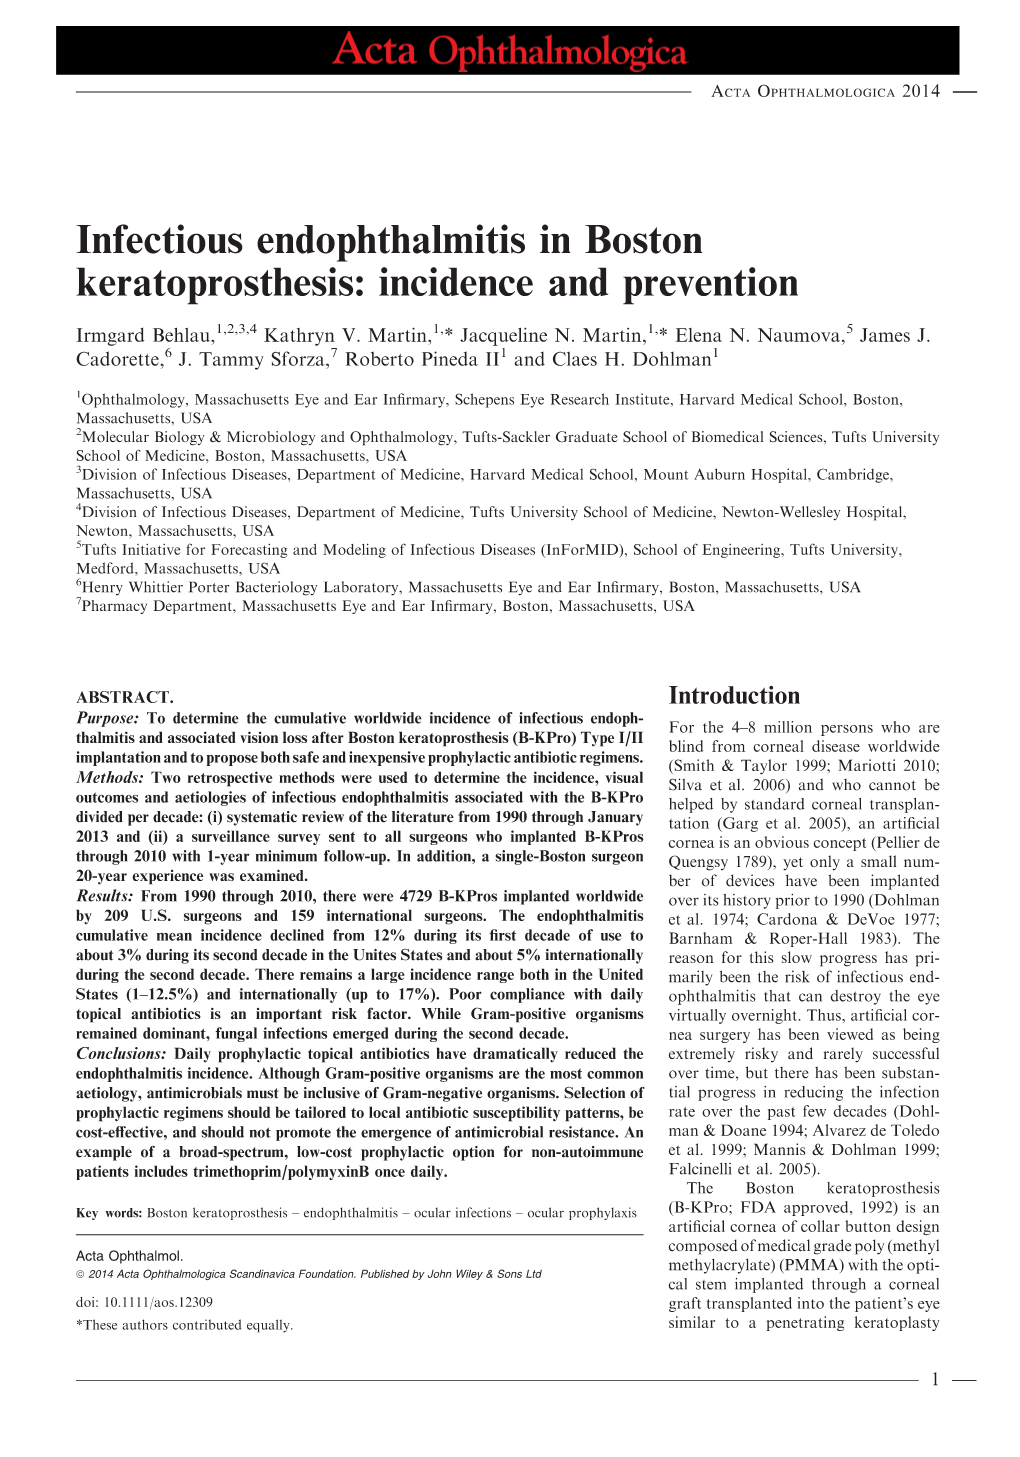 Infectious Endophthalmitis in Boston Keratoprosthesis: Incidence and Prevention